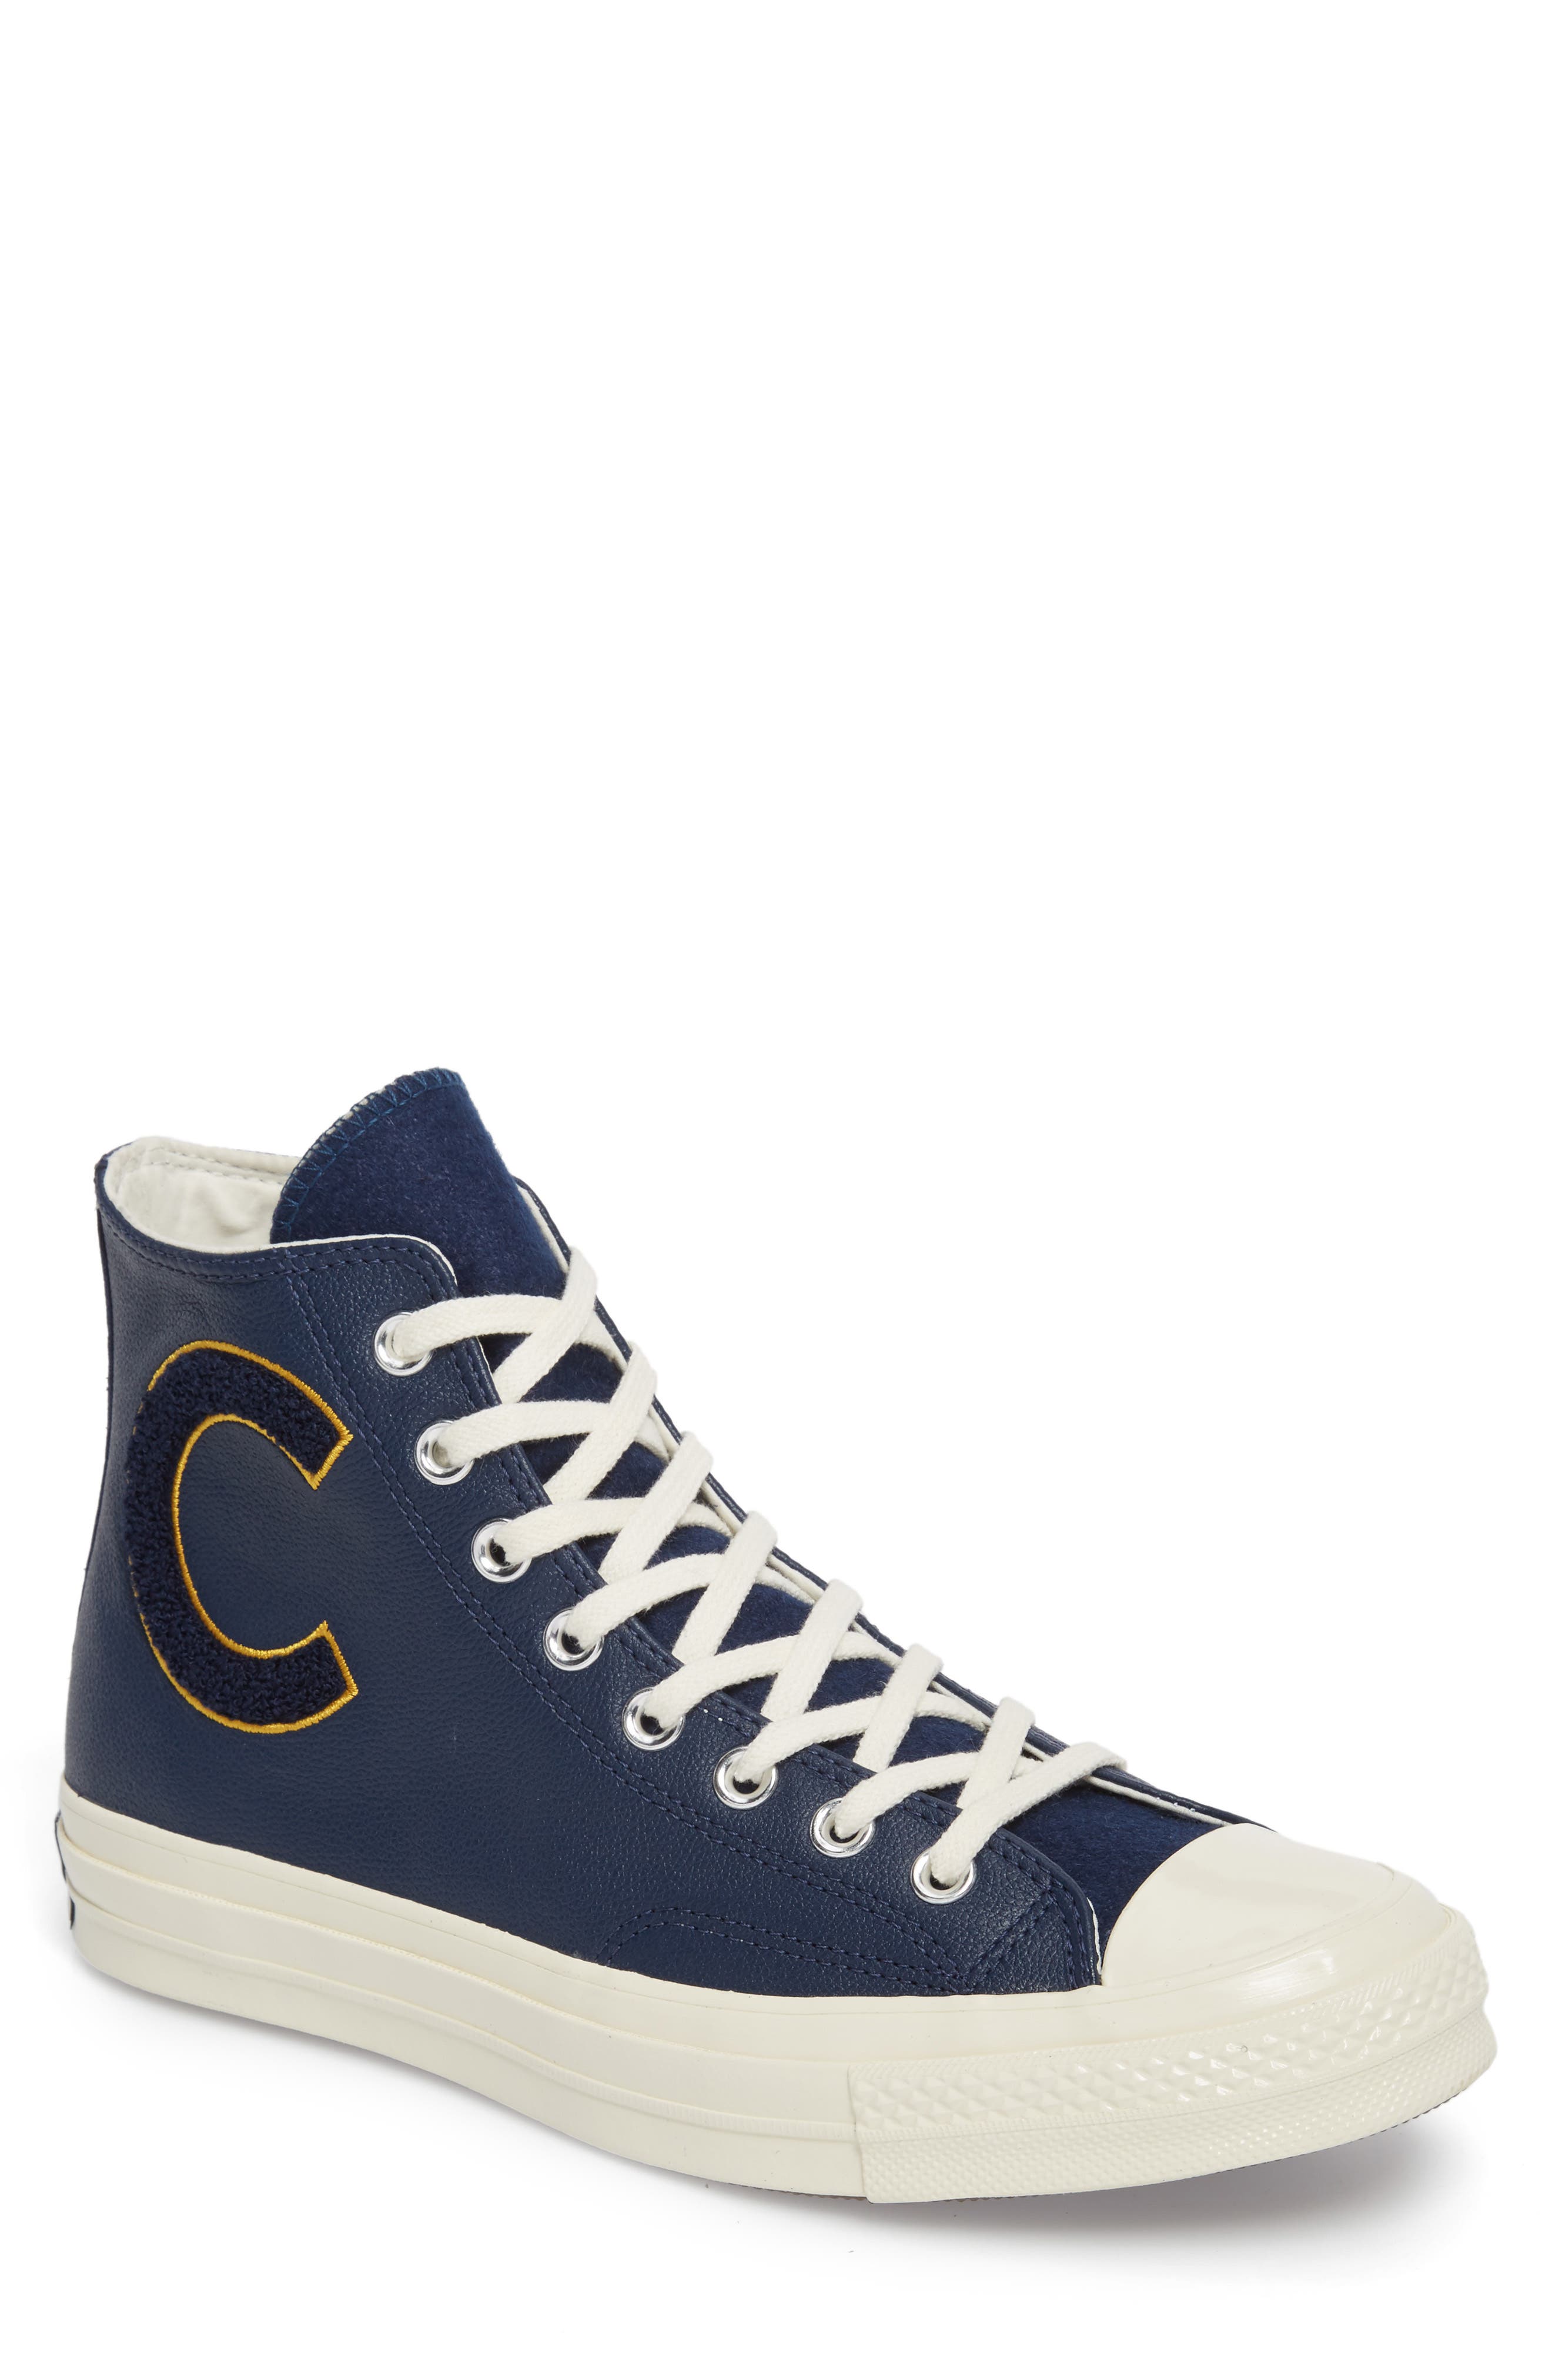 CONVERSE CHUCK TAYLOR ALL STAR WORDMARK HIGH TOP SNEAKER, NAVY LEATHER ...